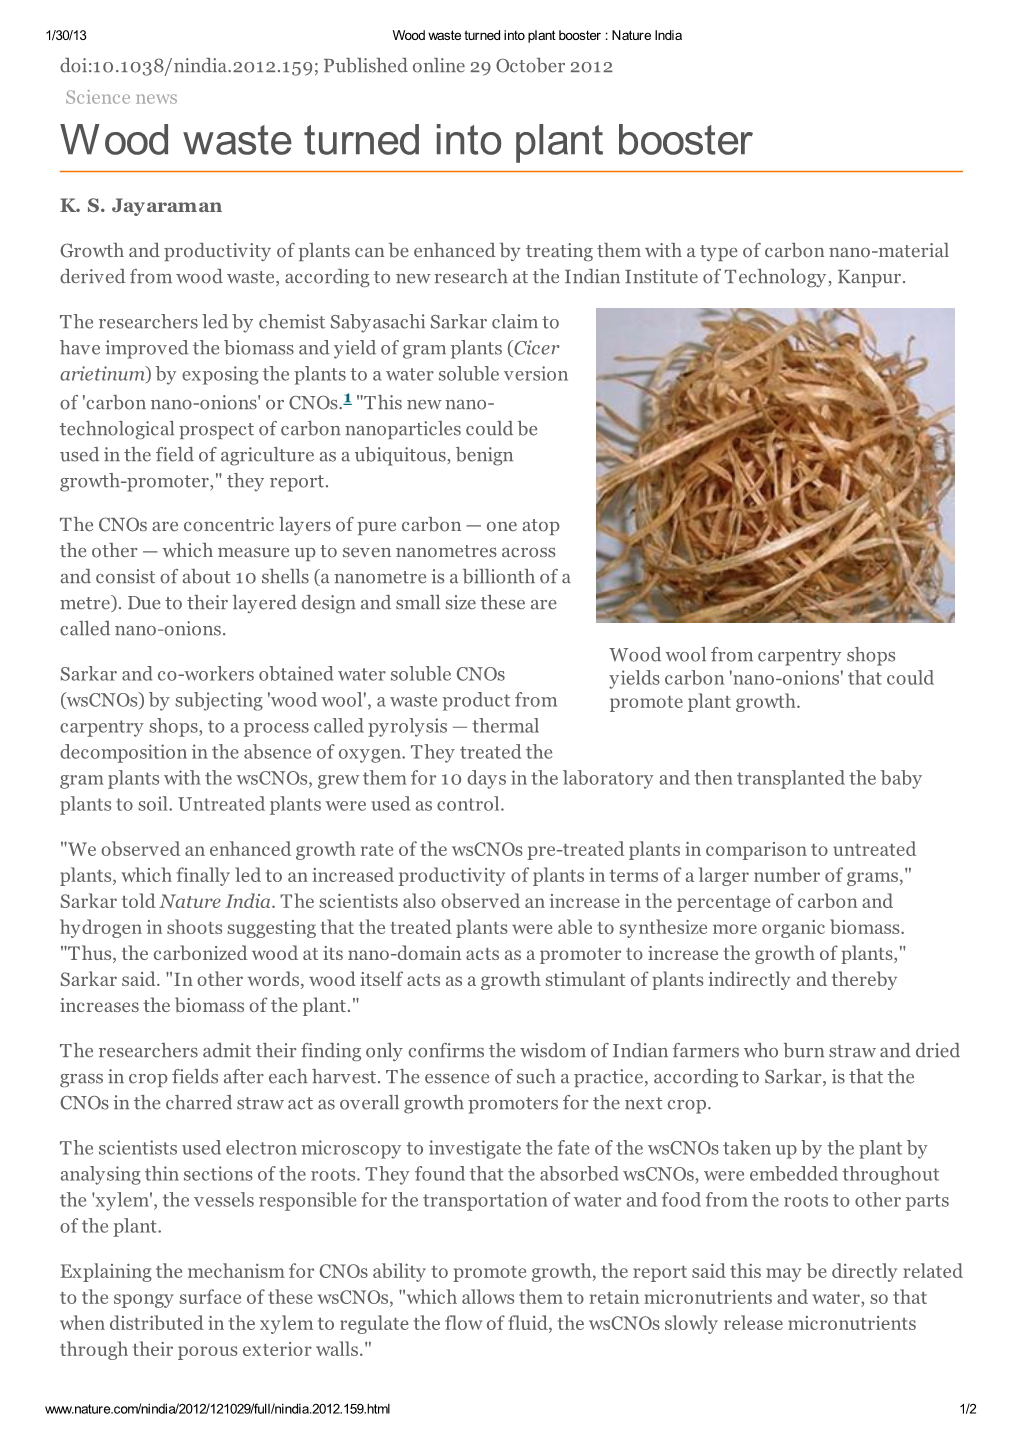 Wood Waste Turned Into Plant Booster : Nature India Doi:10.1038/Nindia.2012.159; Published Online 29 October 2012 Science News Wood Waste Turned Into Plant Booster